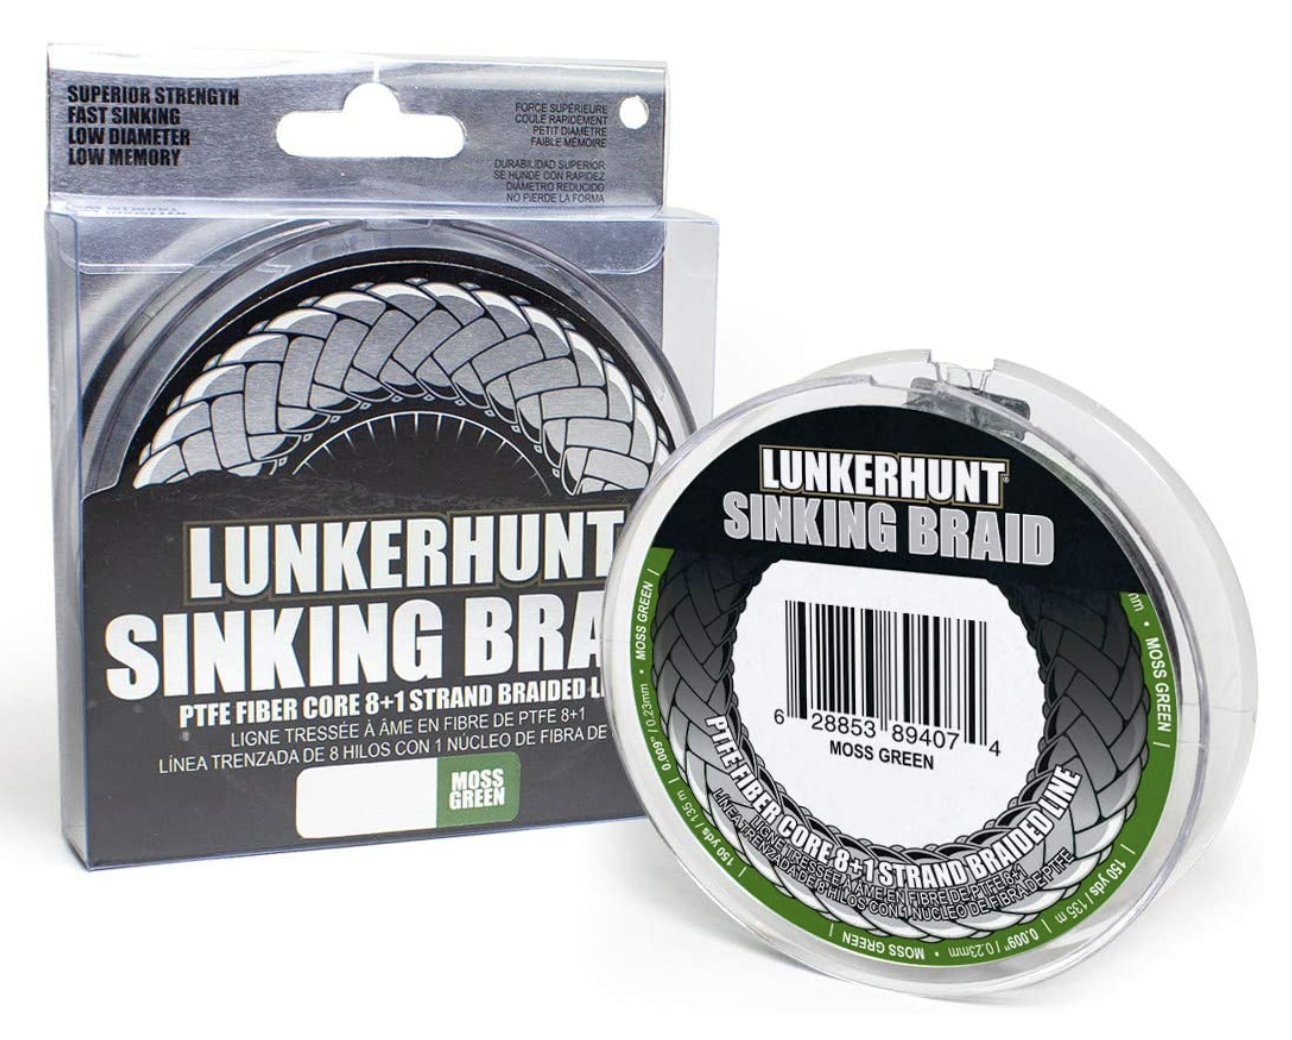 Lunkerhunt Sinking is the best braided fishing line.